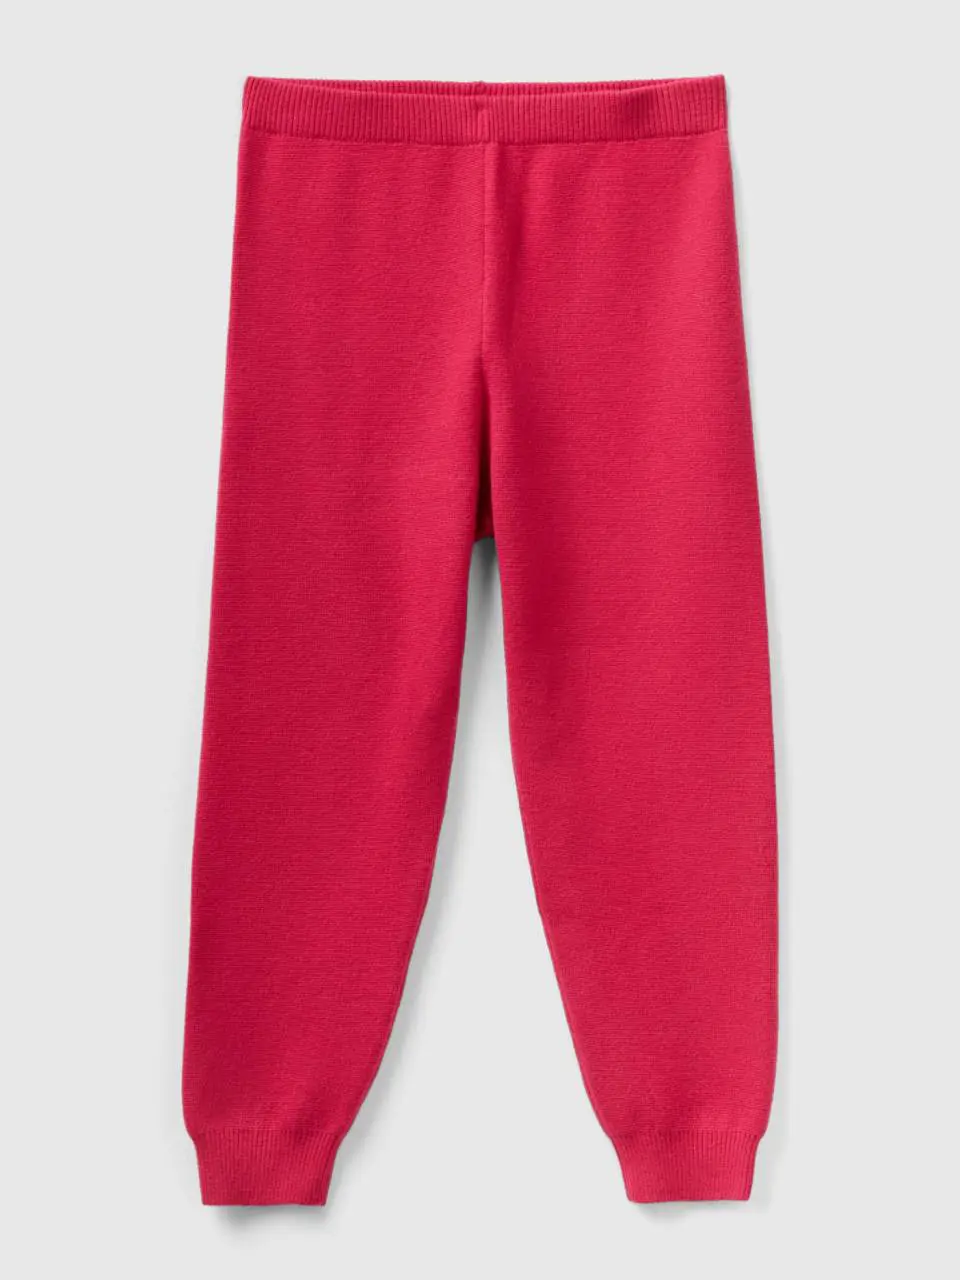 Benetton knit trousers with drawstring. 1